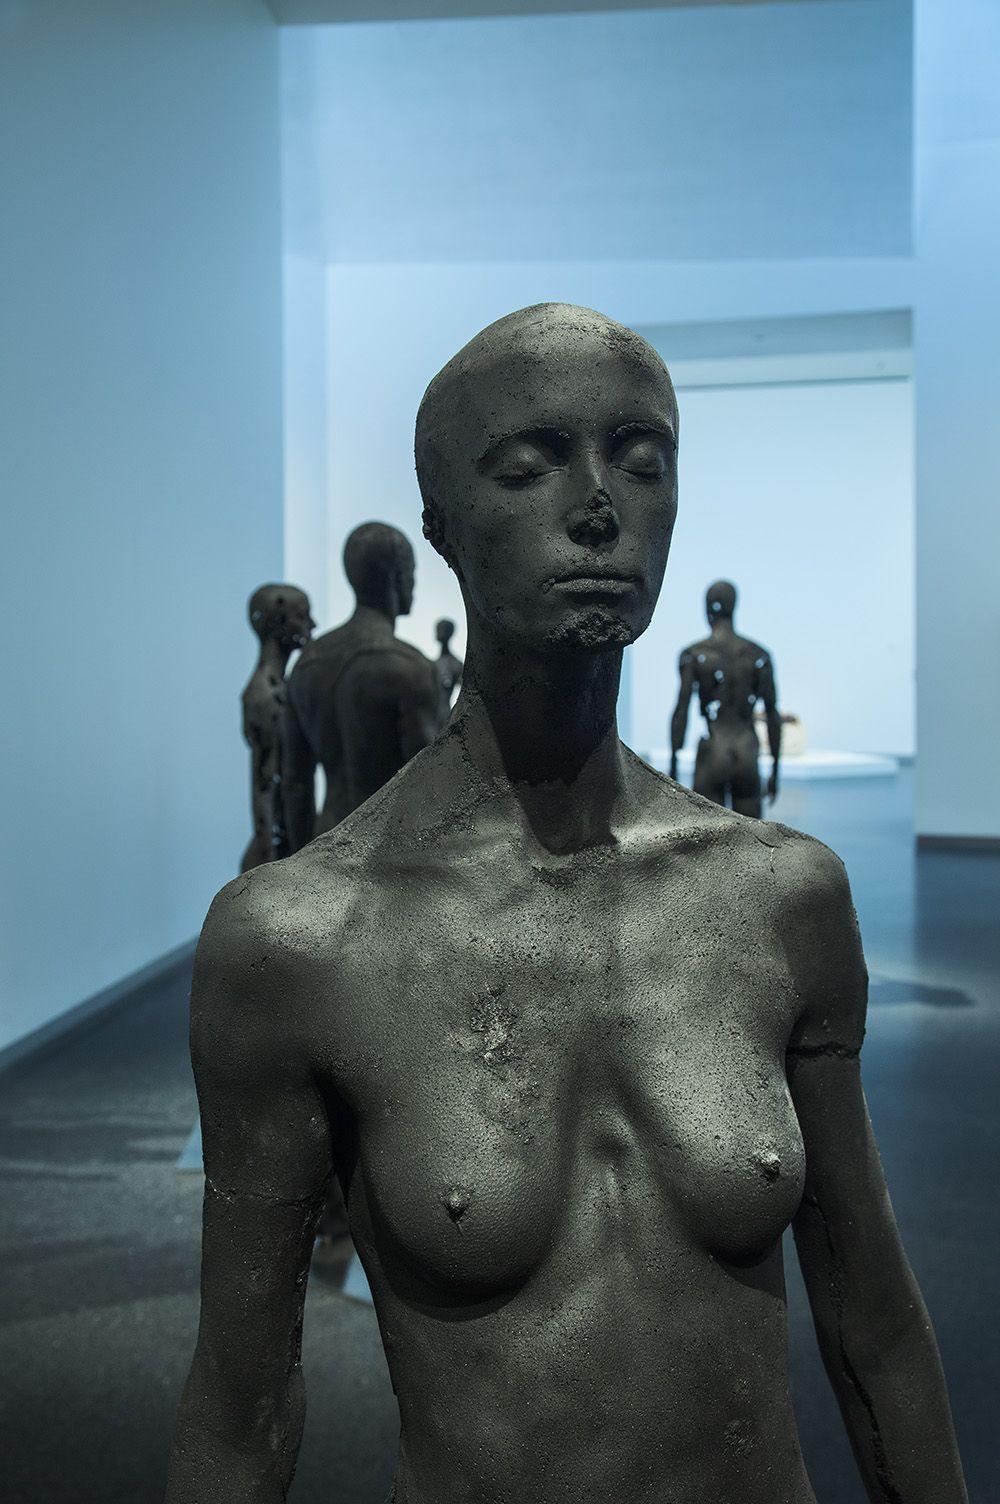 The Presence of Absence – Female (I) by Tom Price - Coal sculpture, nude body For Sale 1